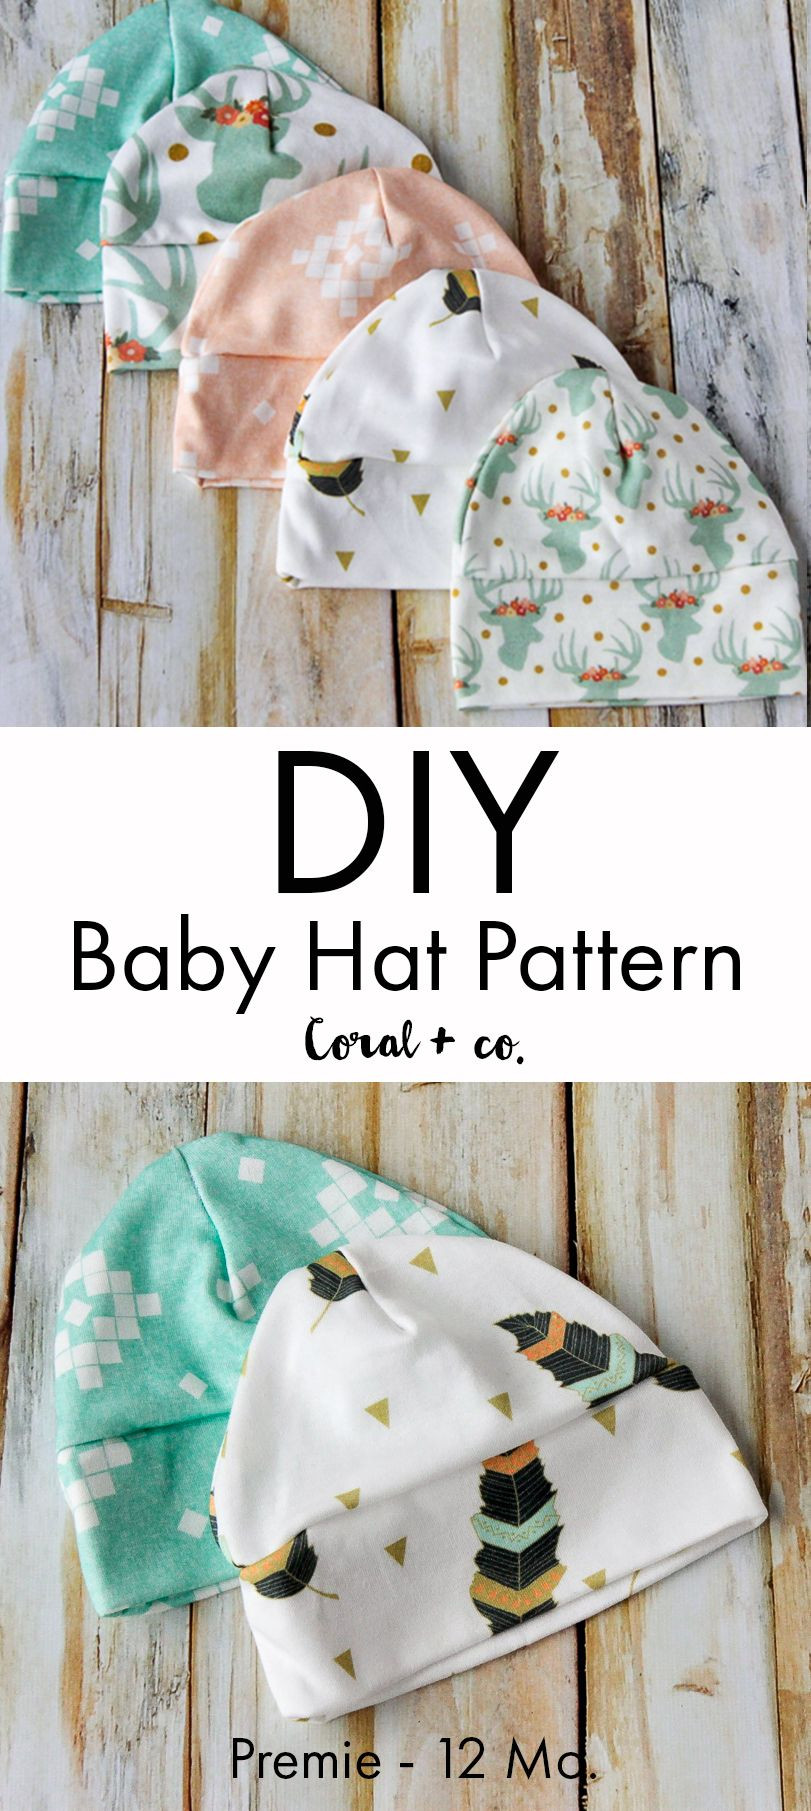 DIY Baby Sewing Projects
 DIY Baby Hat Sewing Pattern and Tutorial Knit Baby Hat